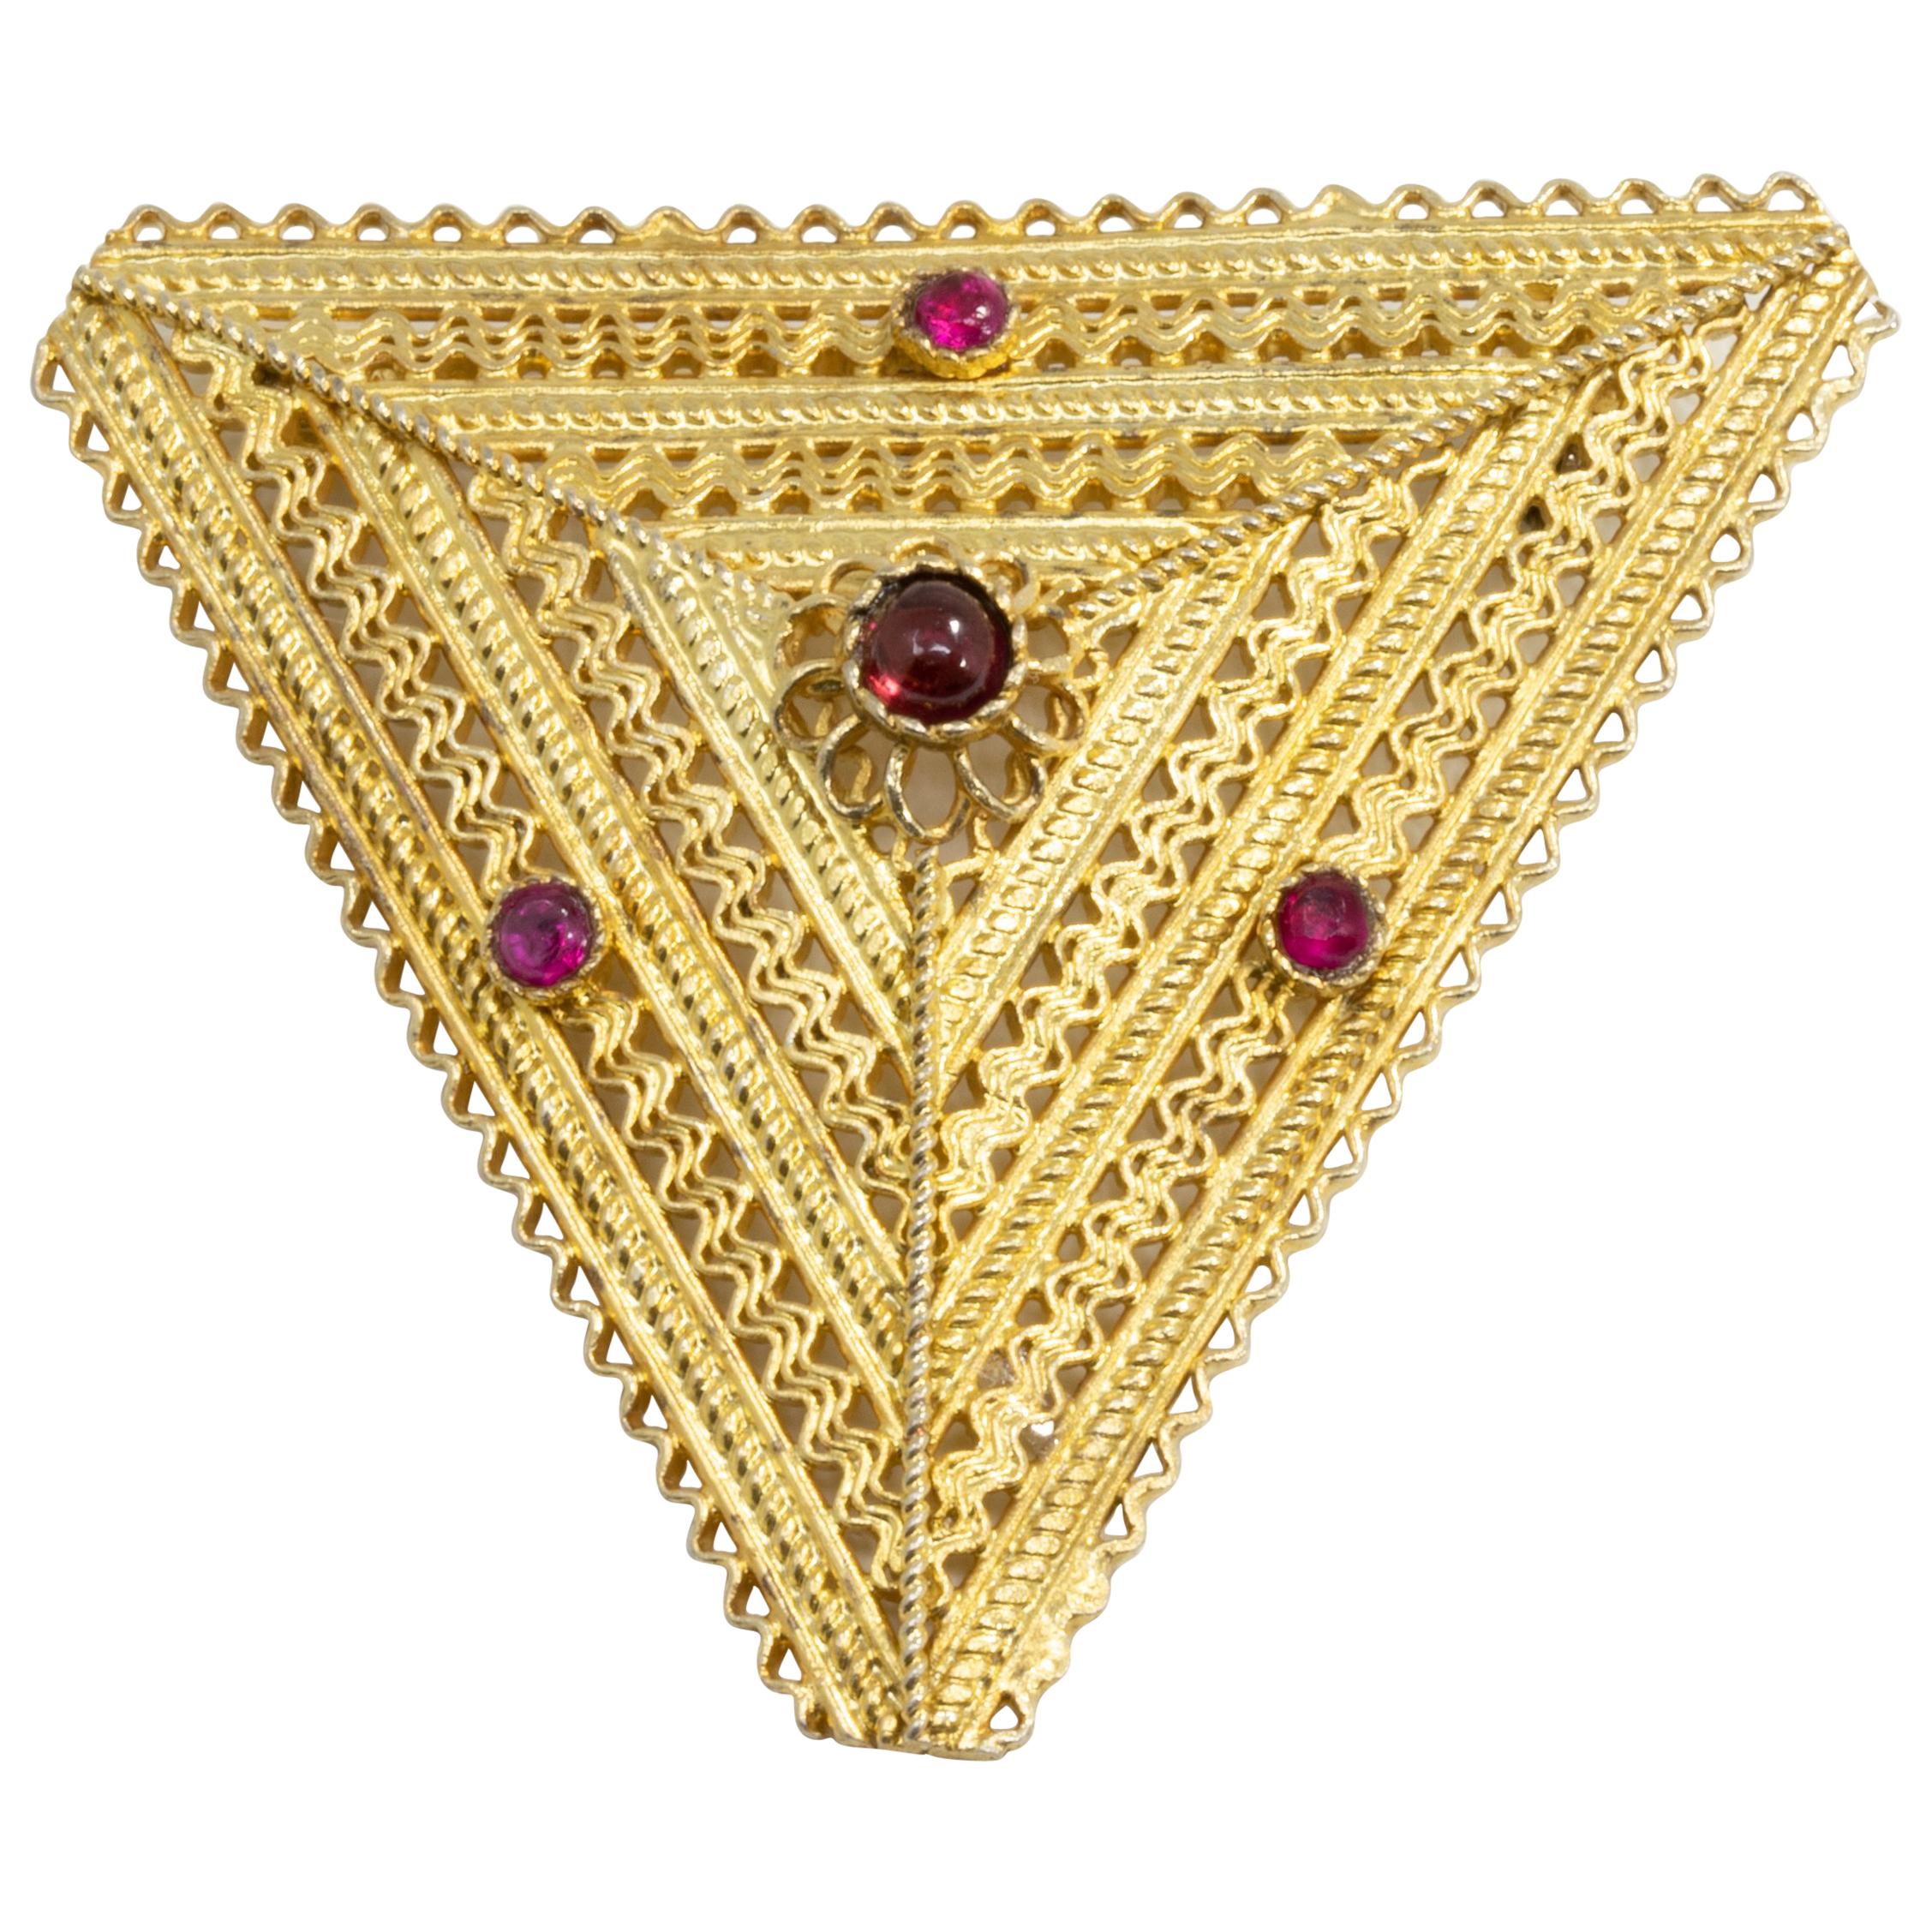 Ruby and Amethyst Triangular Floral Brooch Pin in Gold, Early 1900s For Sale